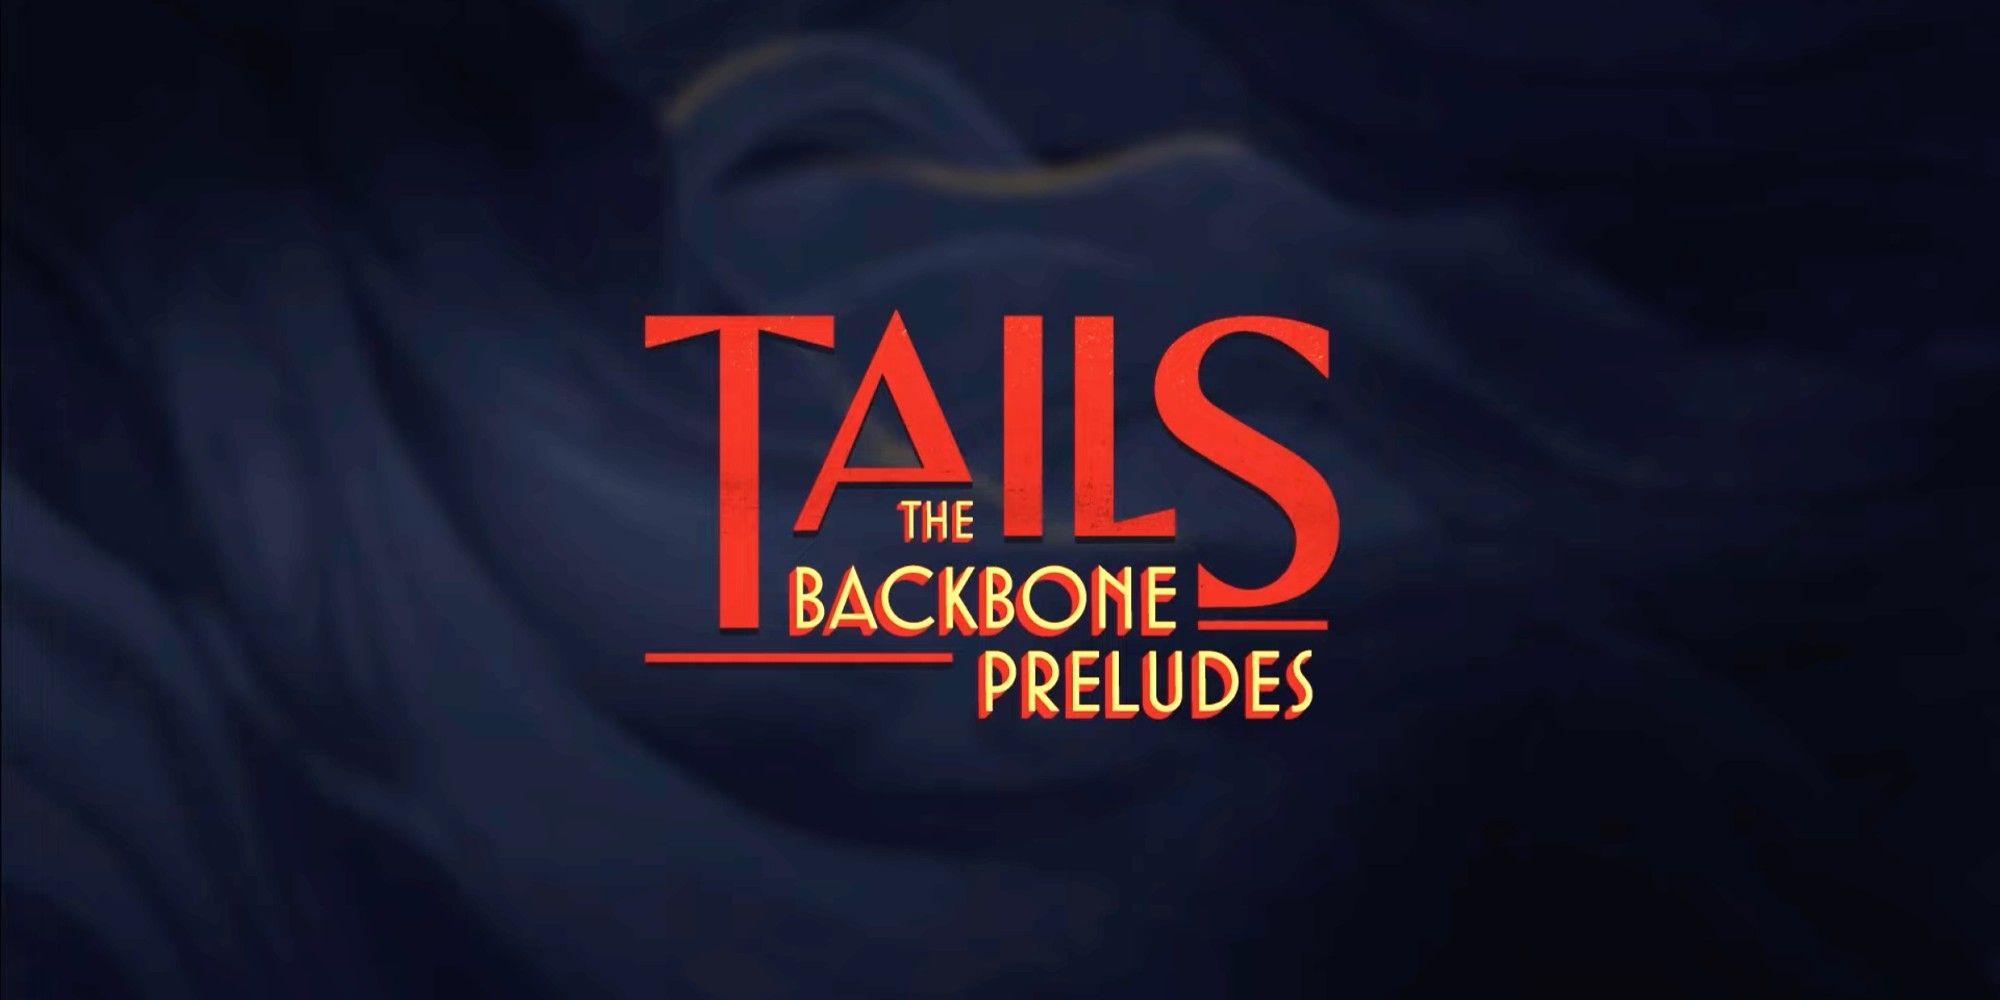 The End Credits - Tails- The Backbone Preludes written in red and yellow font